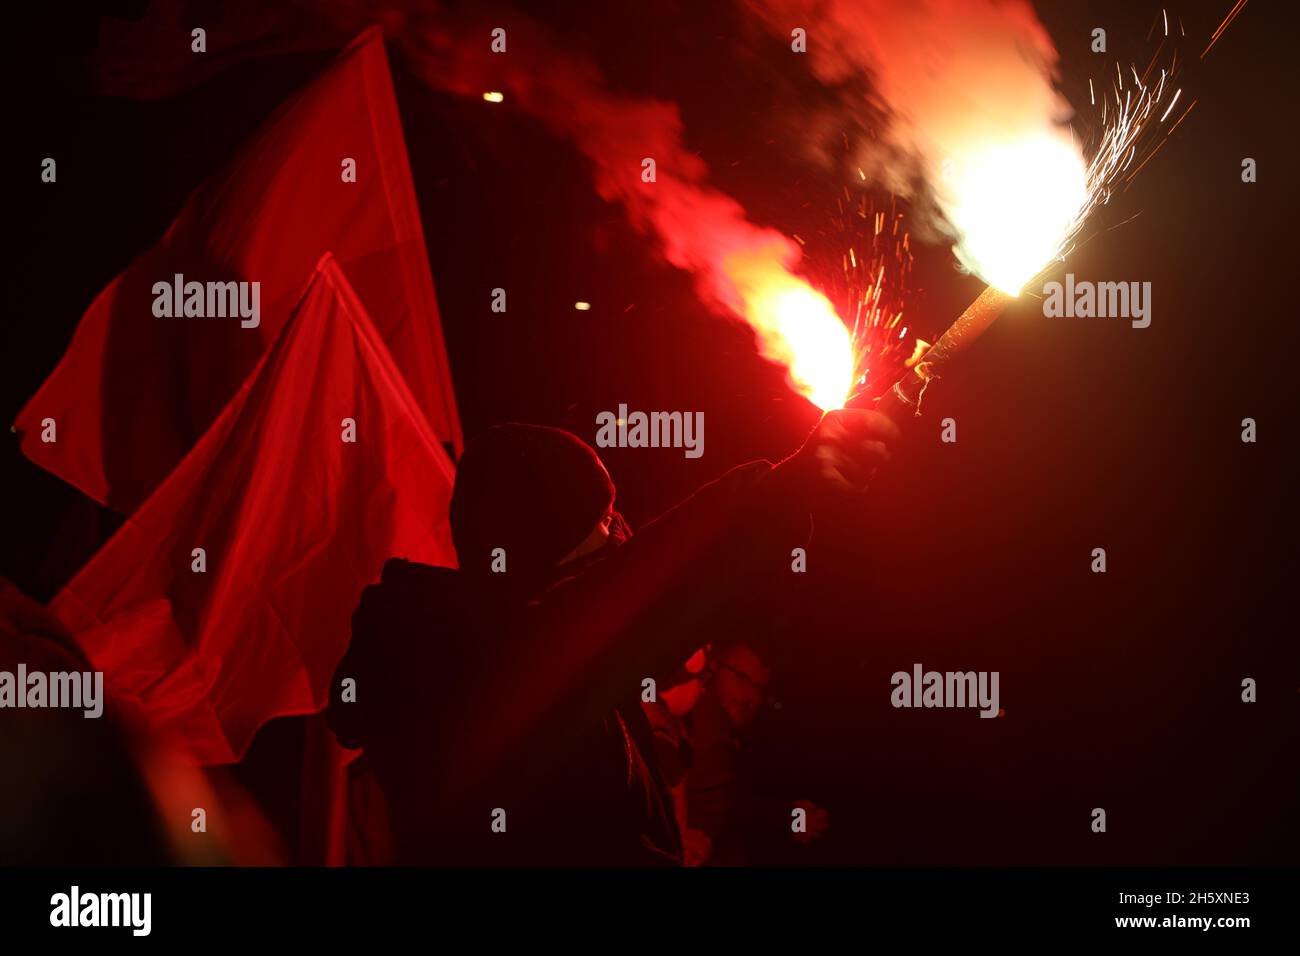 Protester lights flares at Polish nationalist march. Stock Photo